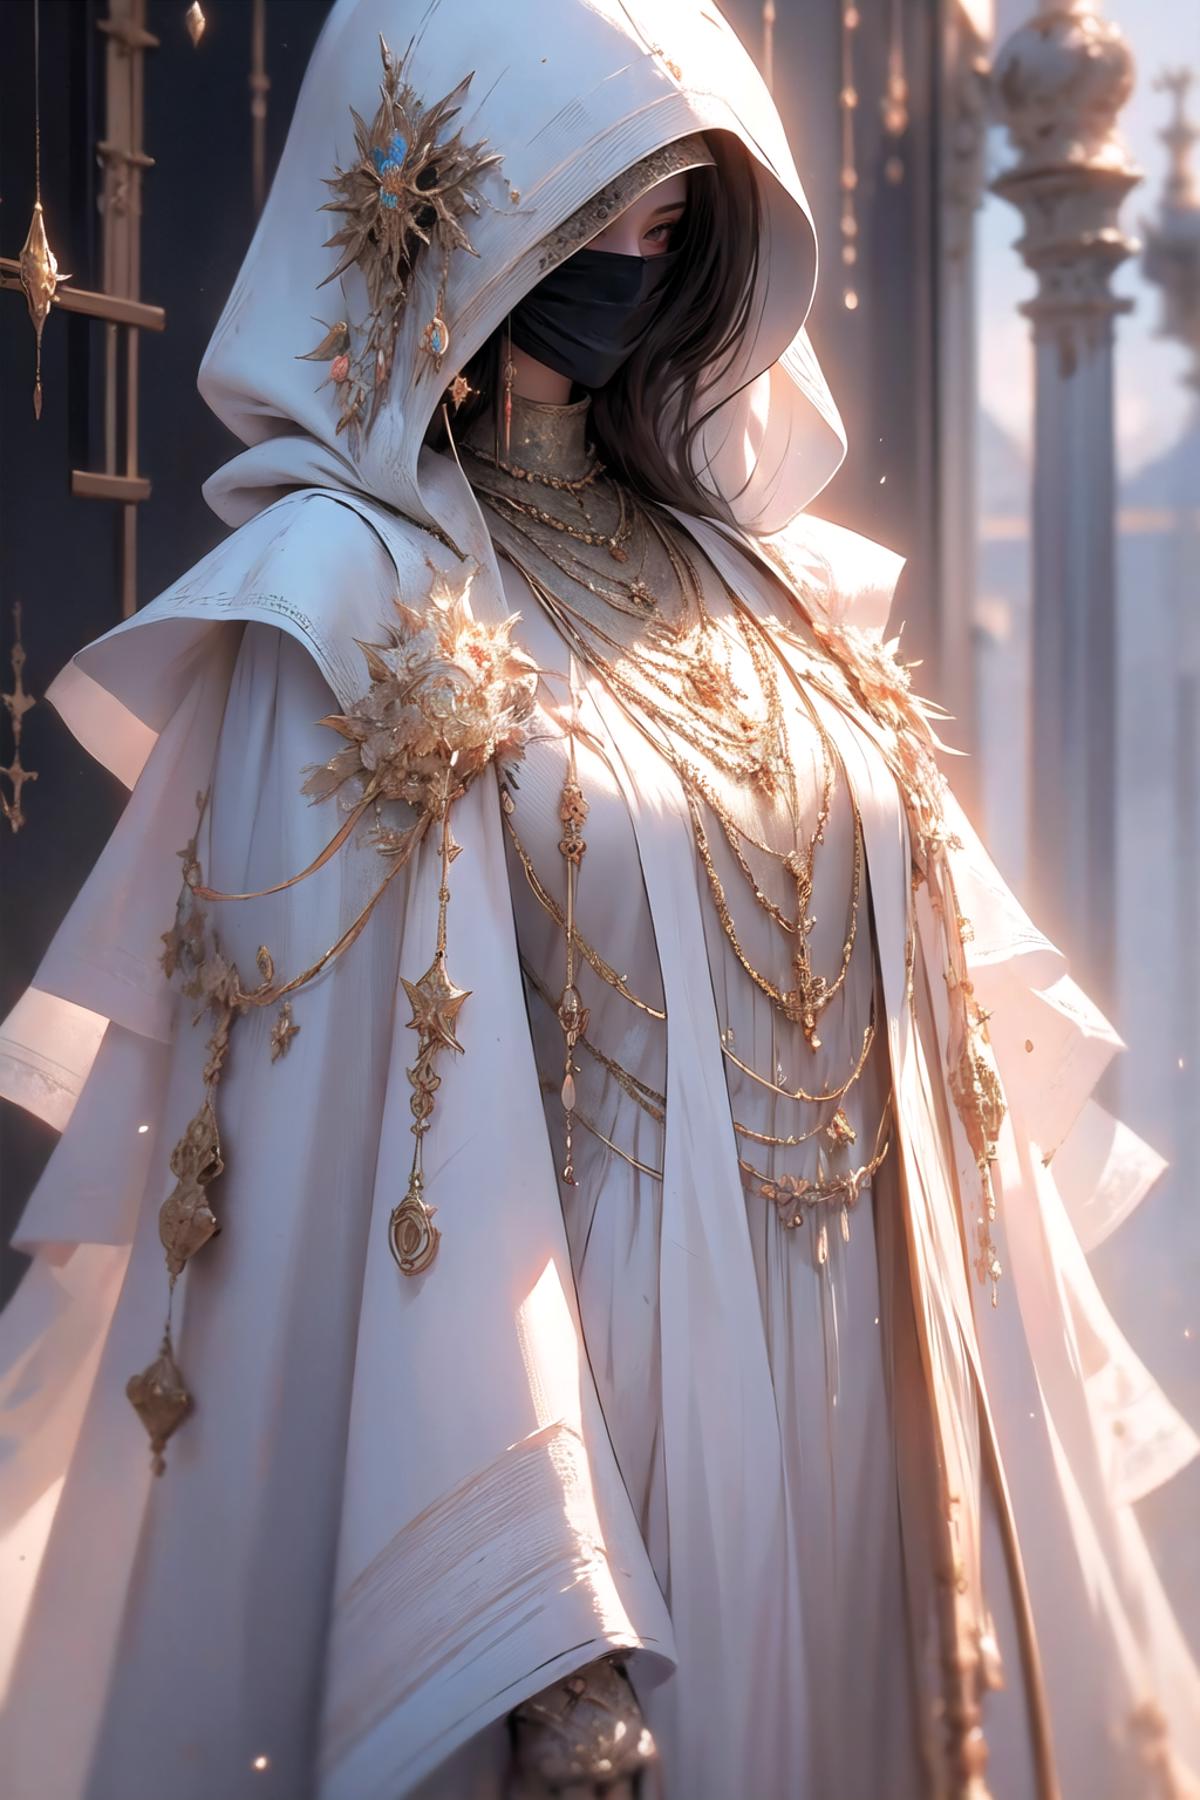 Arc en Gowns | A wrench's Gown Collection image by wrench1815